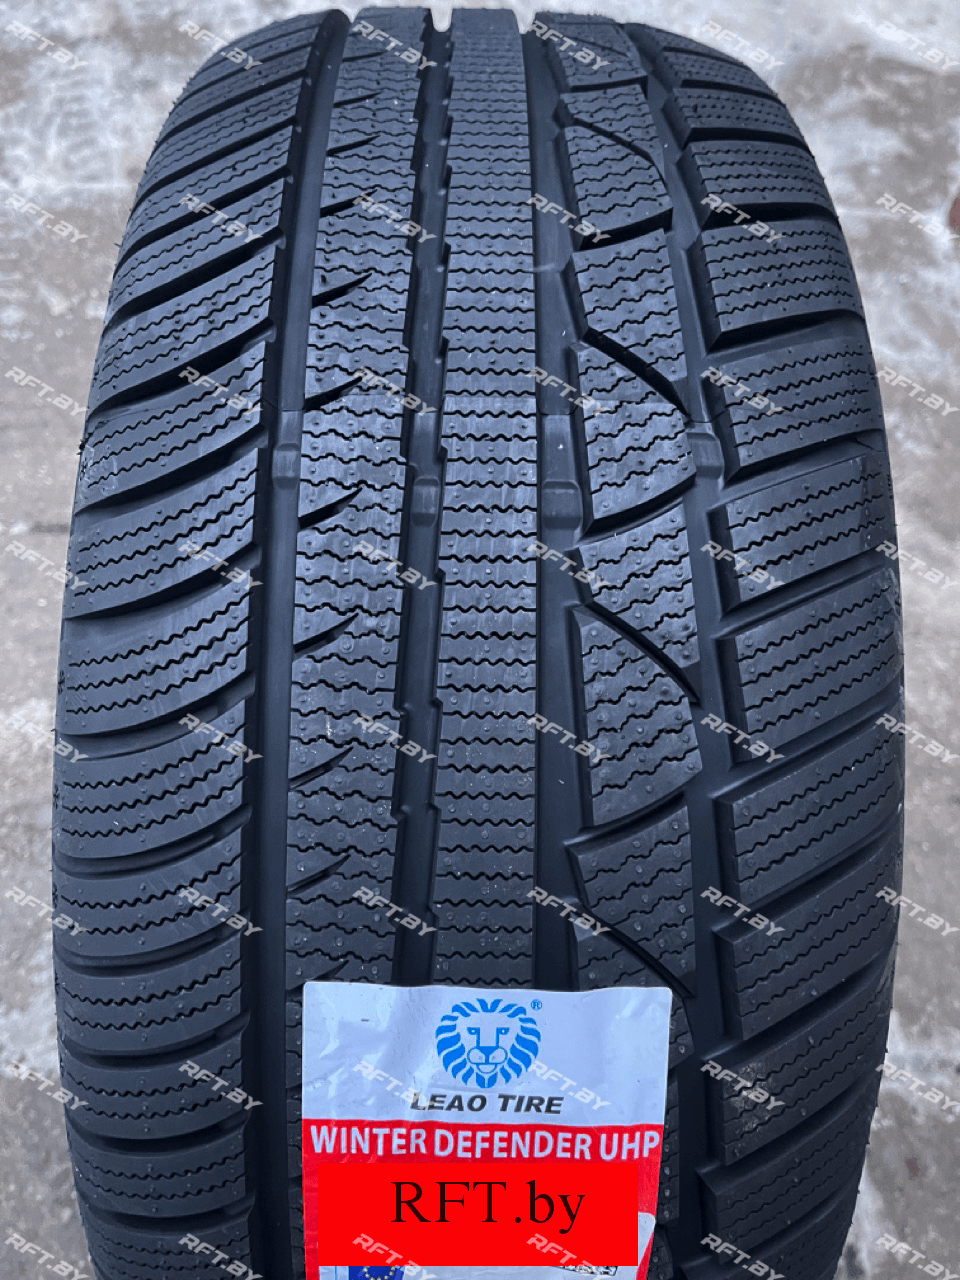 LEAO Winter Defender UHP 225/60R16 102H